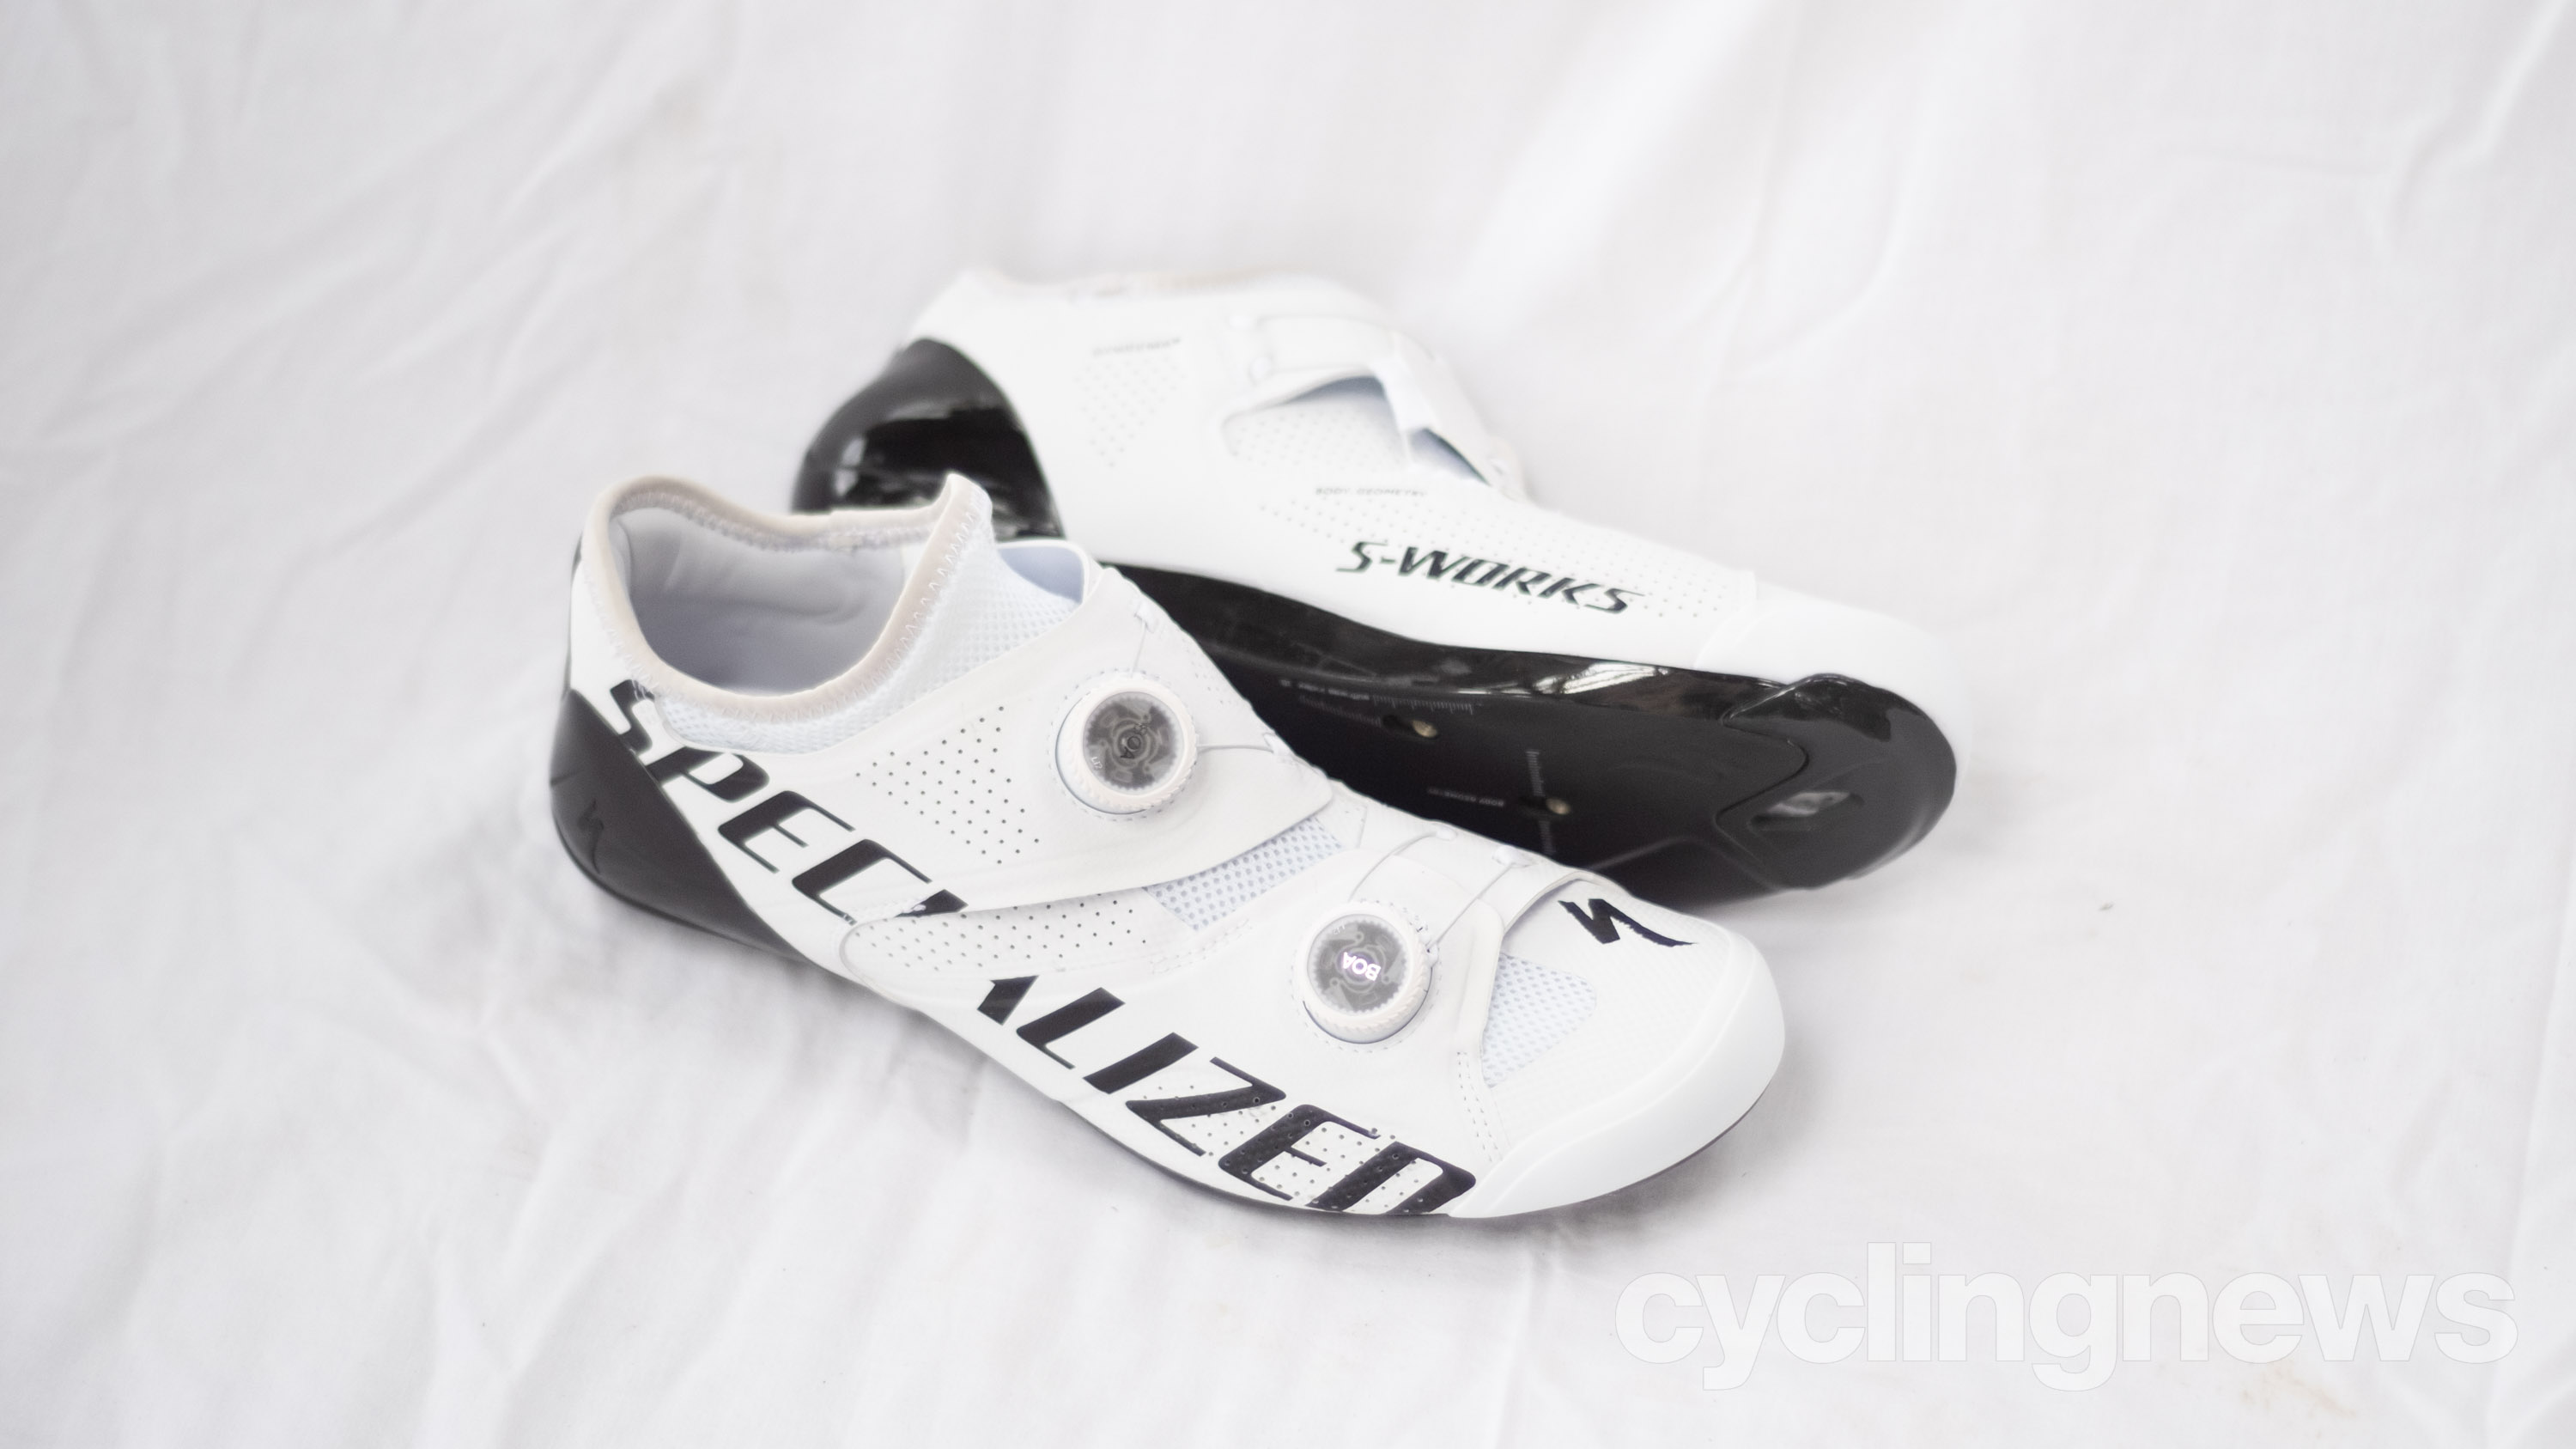 SPECIALIZED couvre-chaussures avec logo S